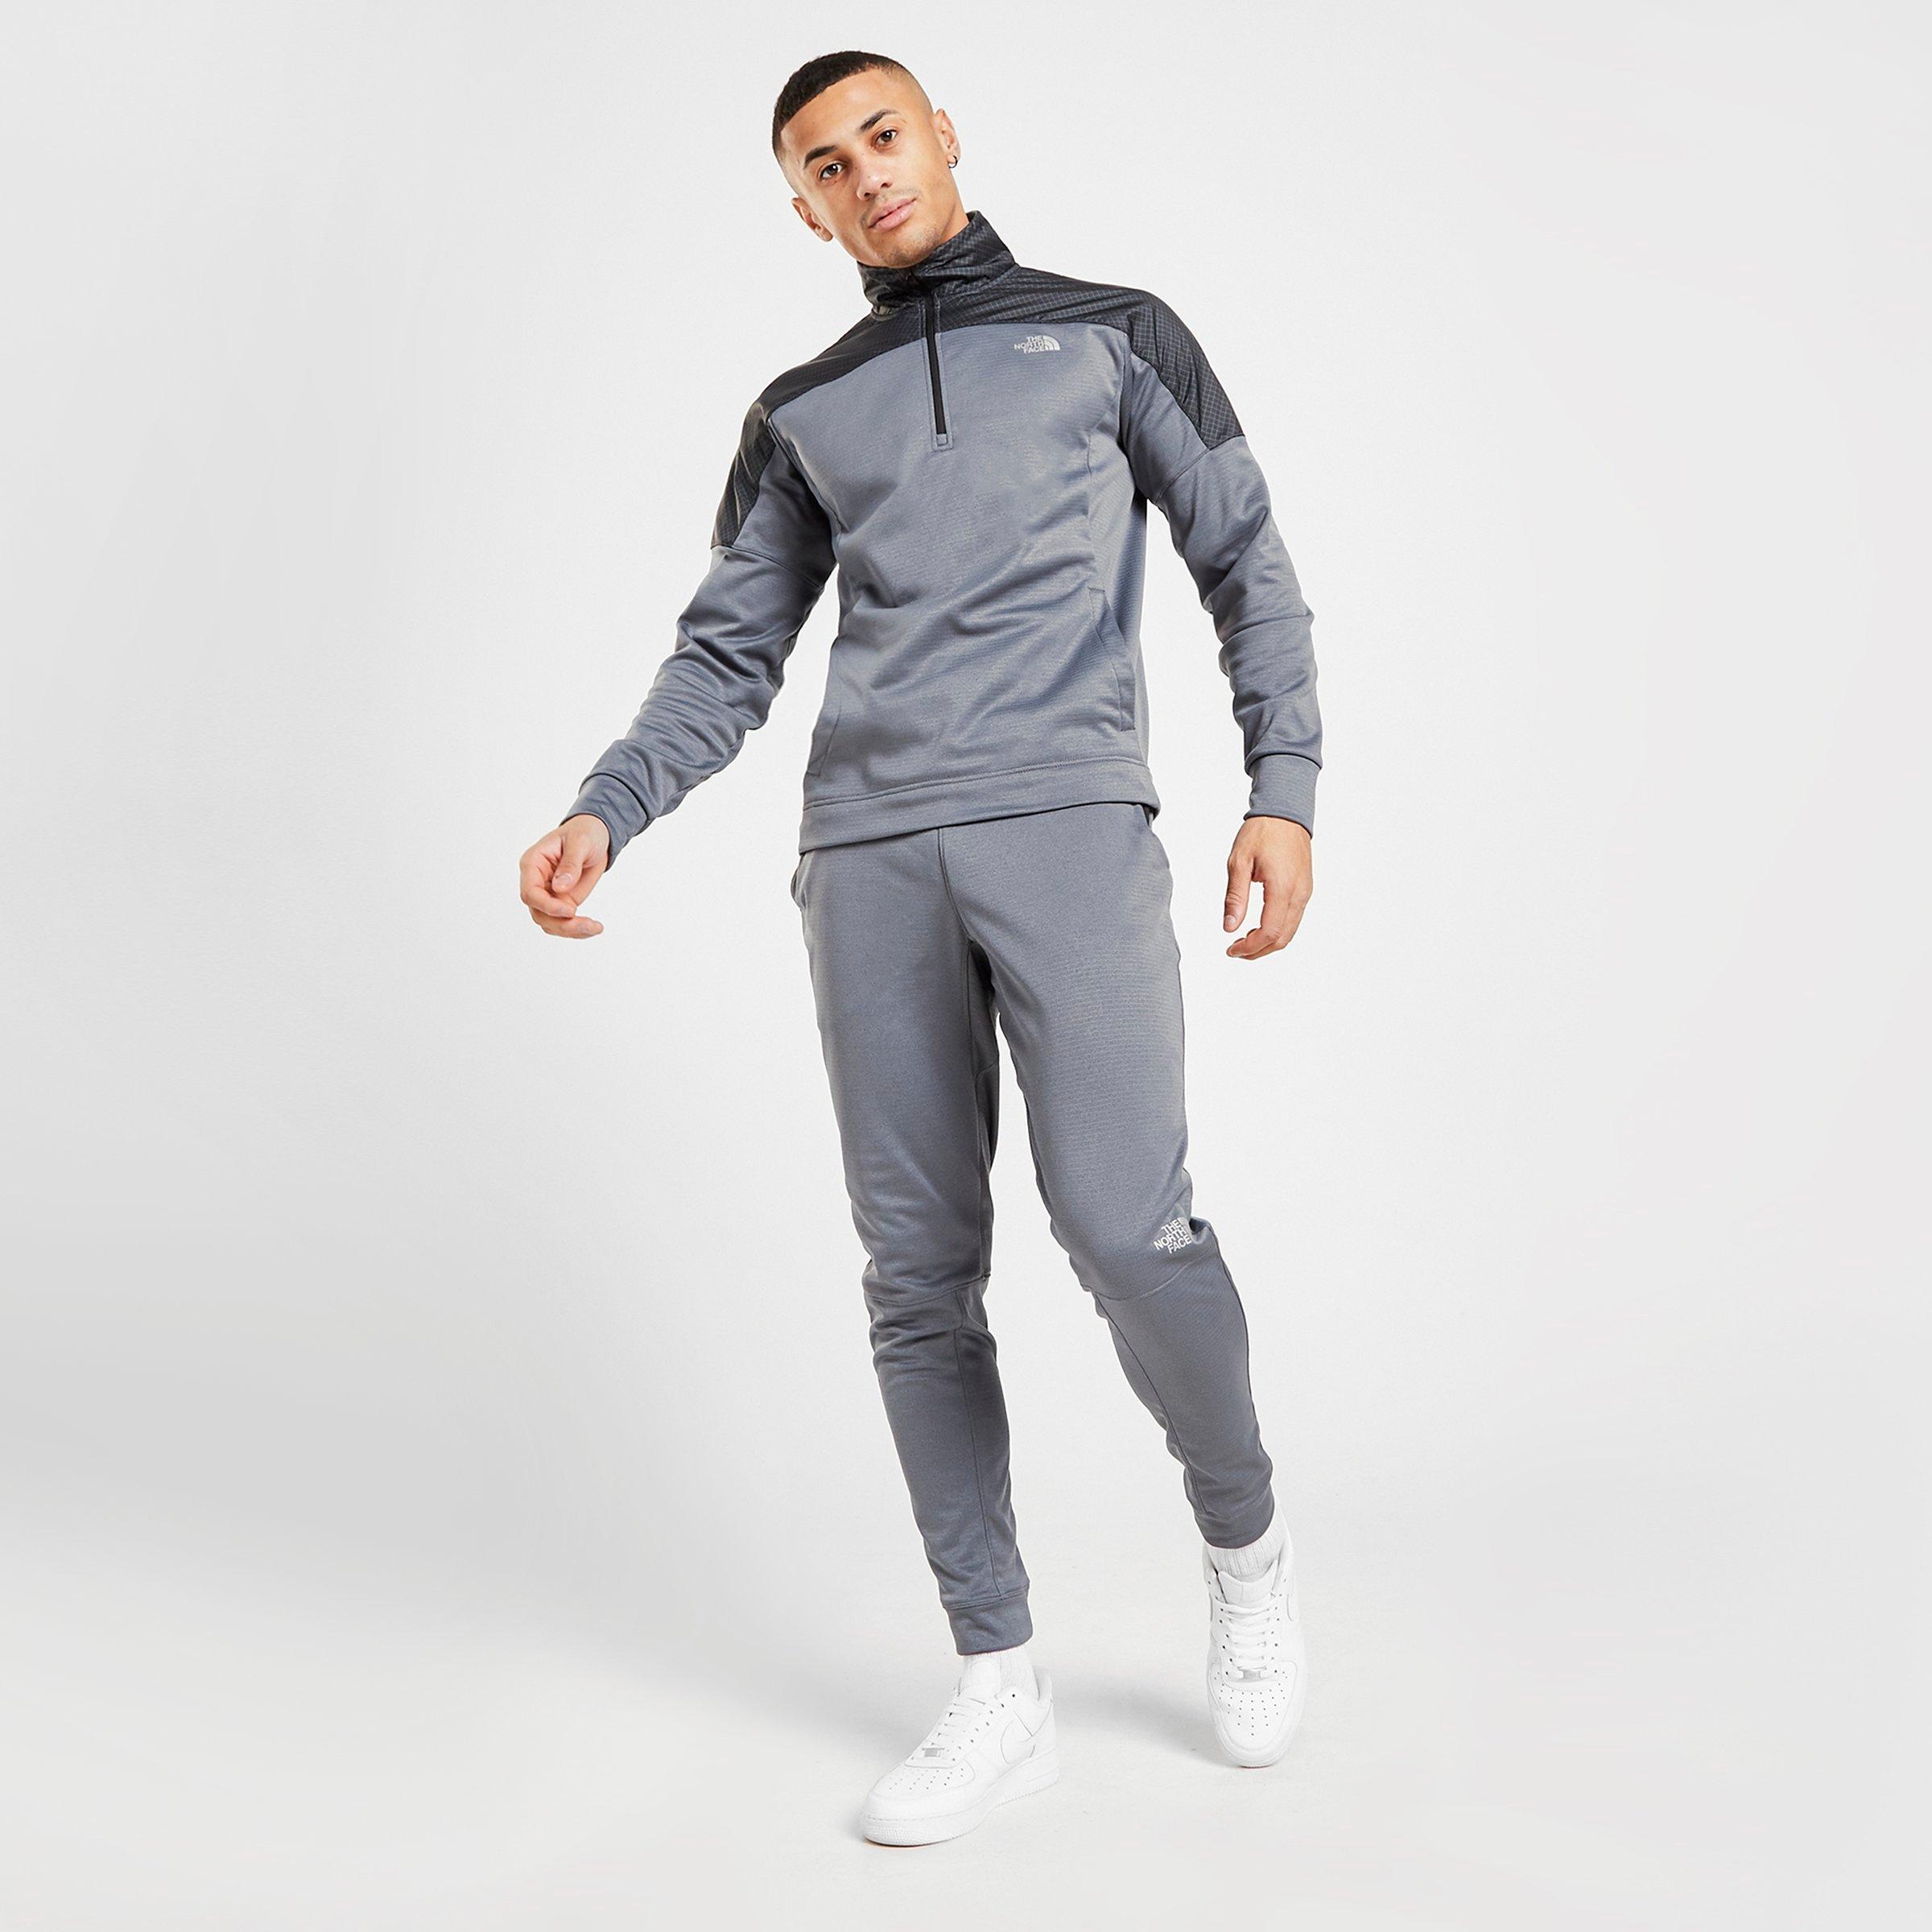 north face tracksuits for sale